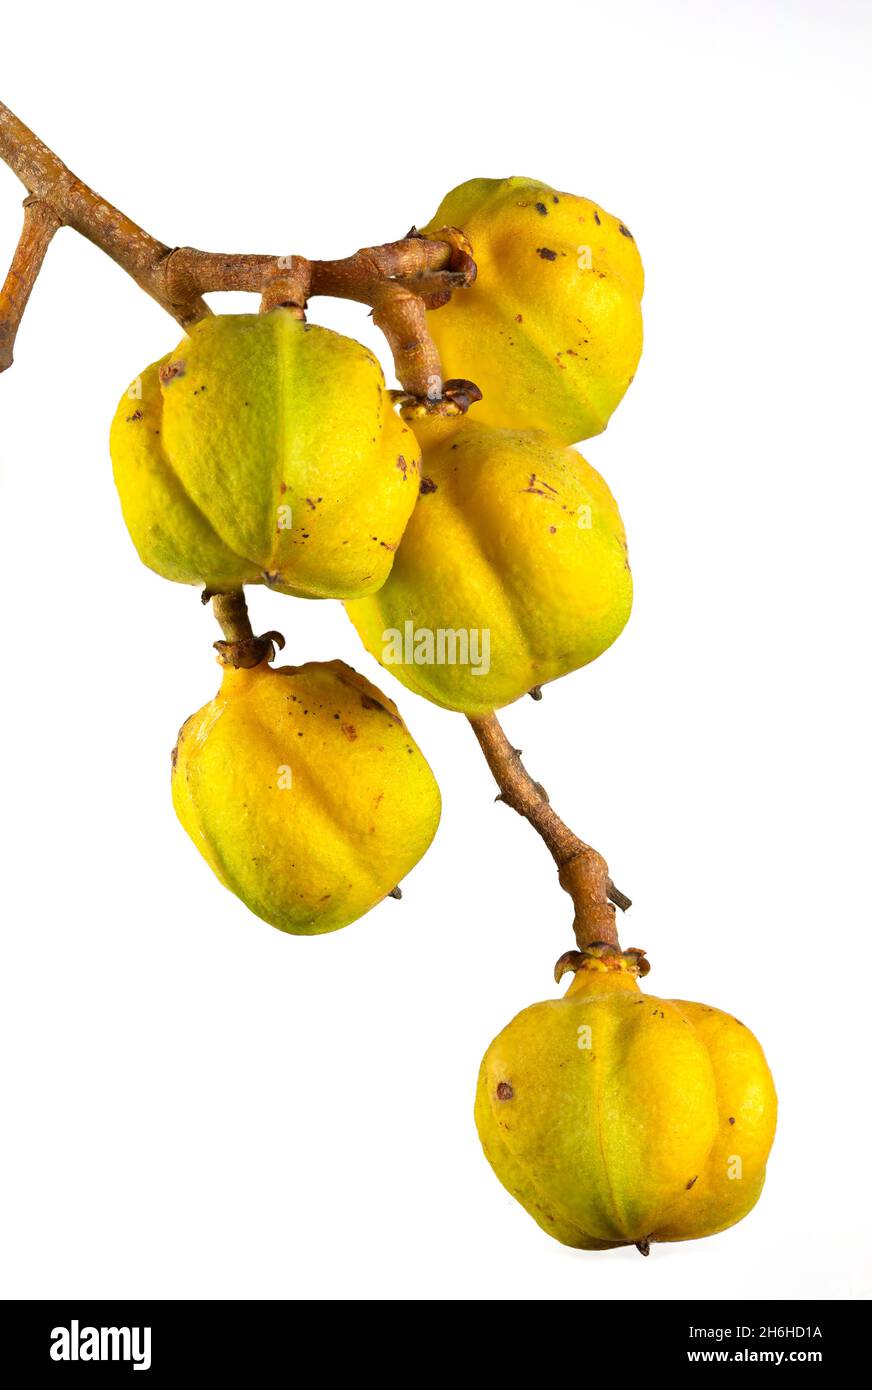 Image of the fruit of the Tuckeroo tree, Cupaniopsis anacardioides, an Australia native growing along the east coast from Northern Queensland to New S Stock Photo